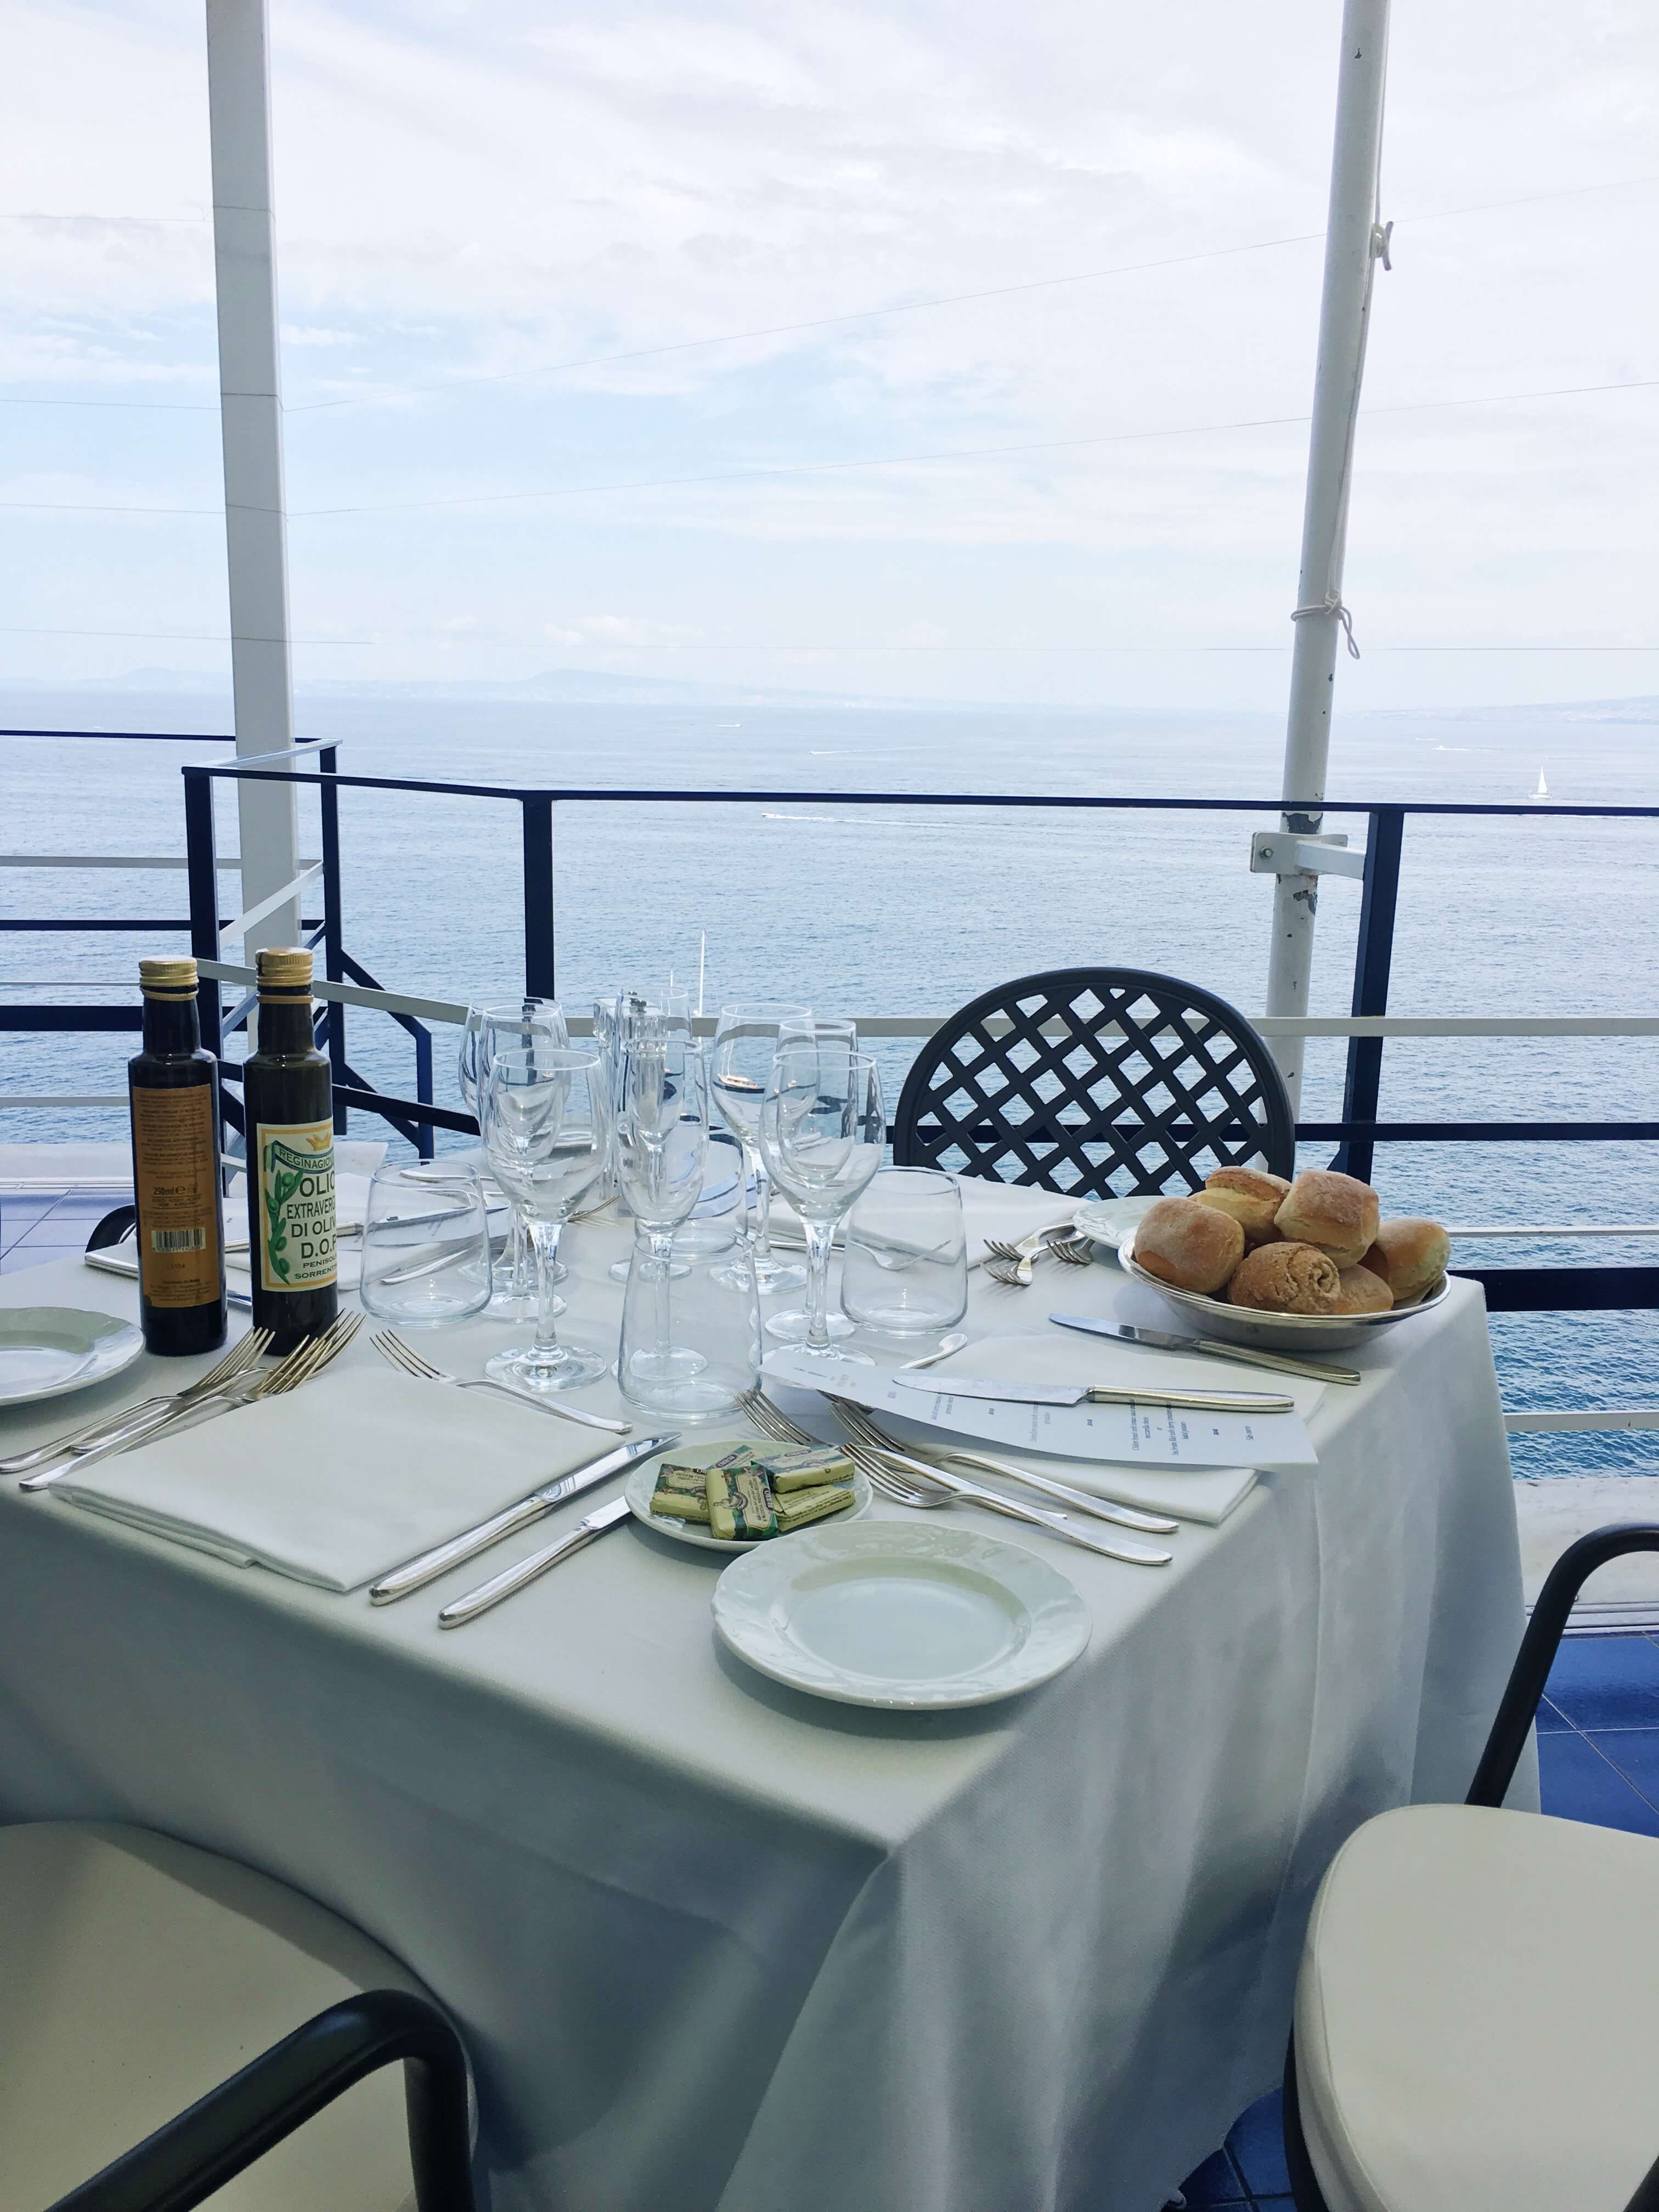 restaurant view at hotel parco dei principi in sorrento, italy